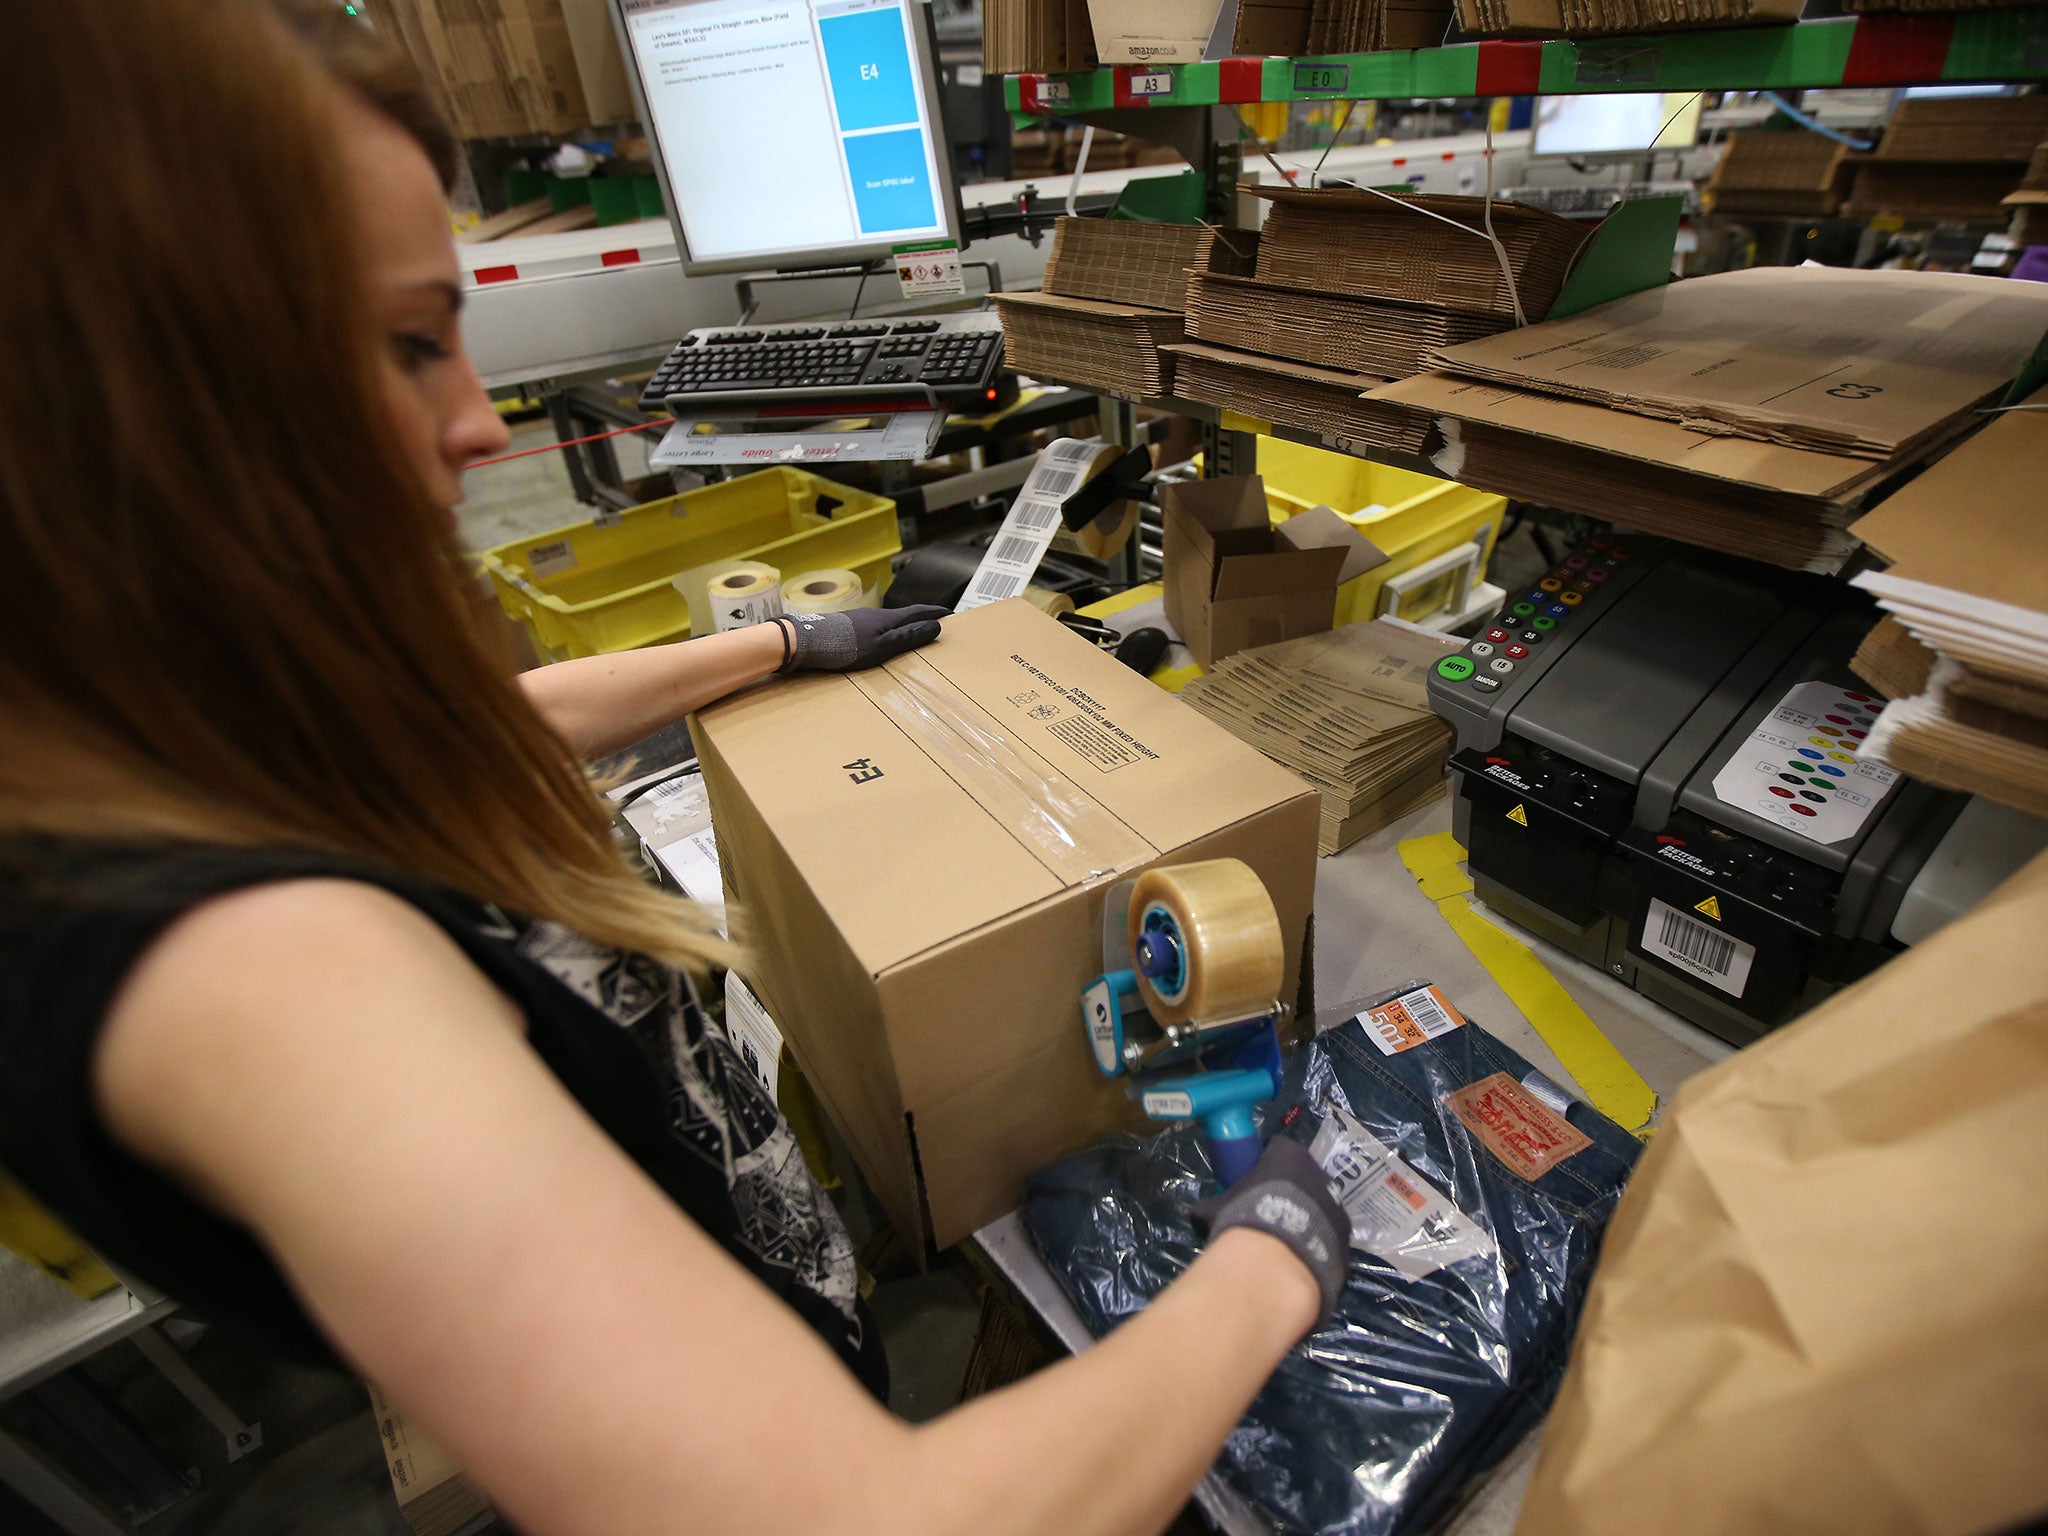 A parcel being prepared at an Amazon warehouse